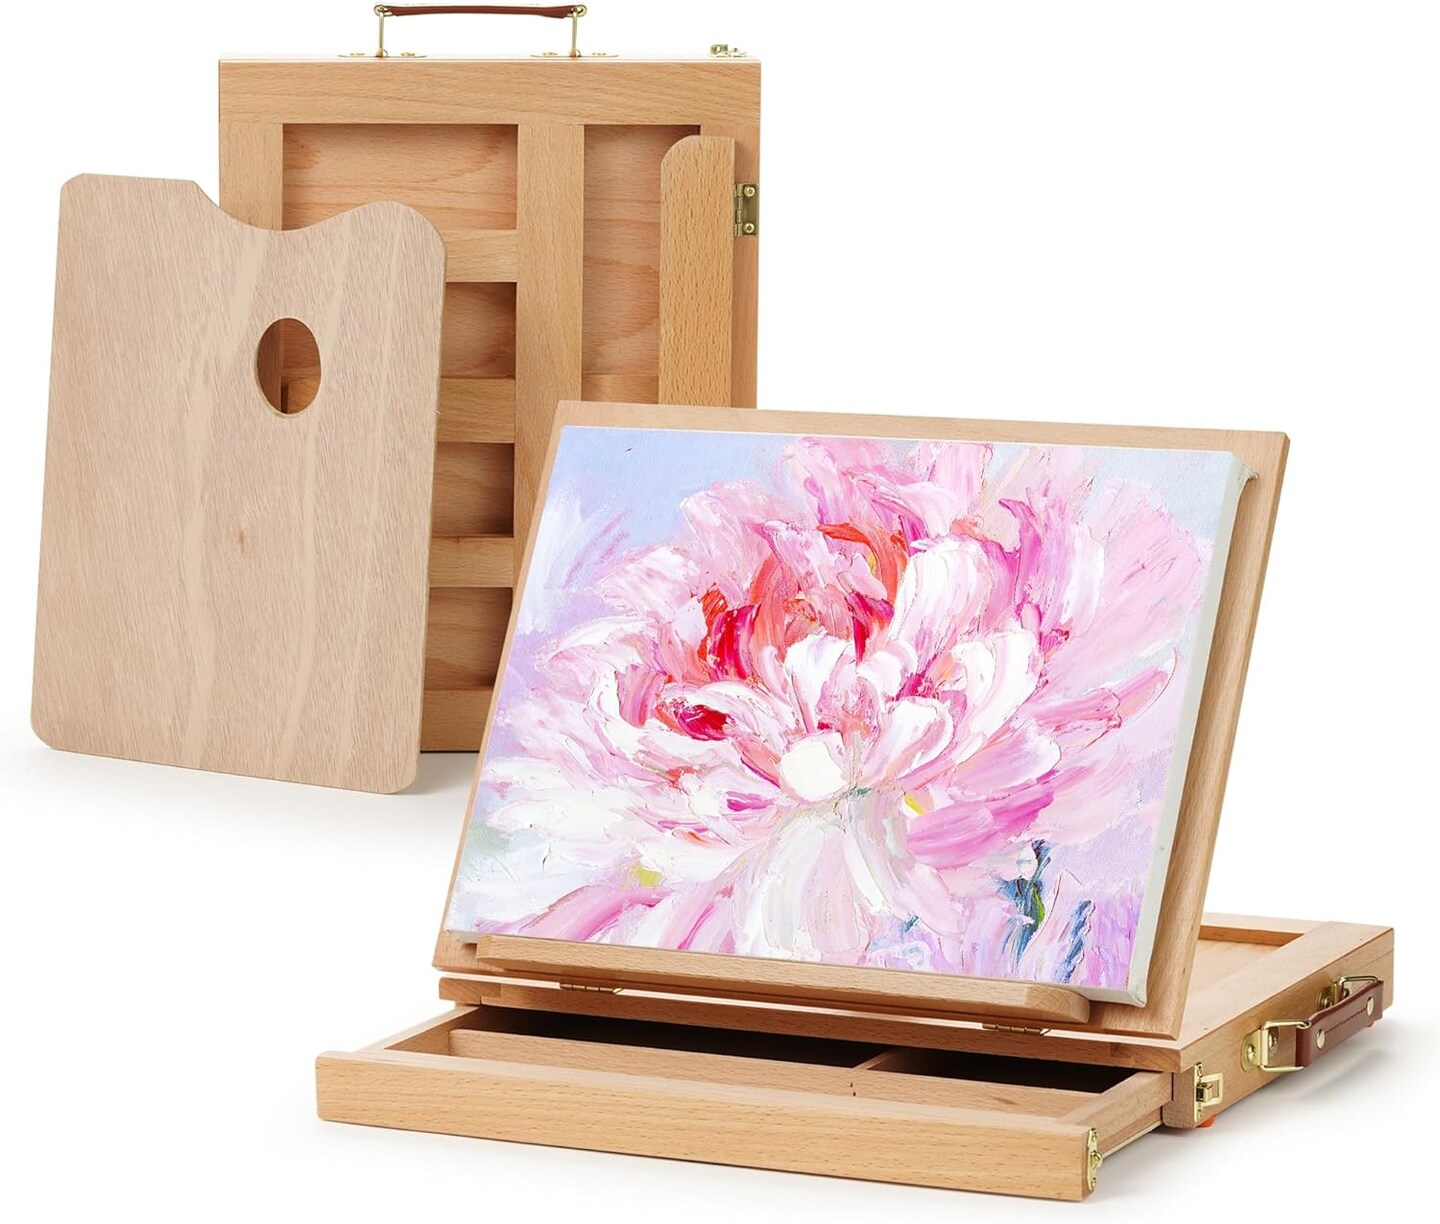 ARTIFY Portable Wooden Tabletop Art Easel for Painting Canvases, Drawing and Sketching, for Artists, Children, Beginners &#x26; Student